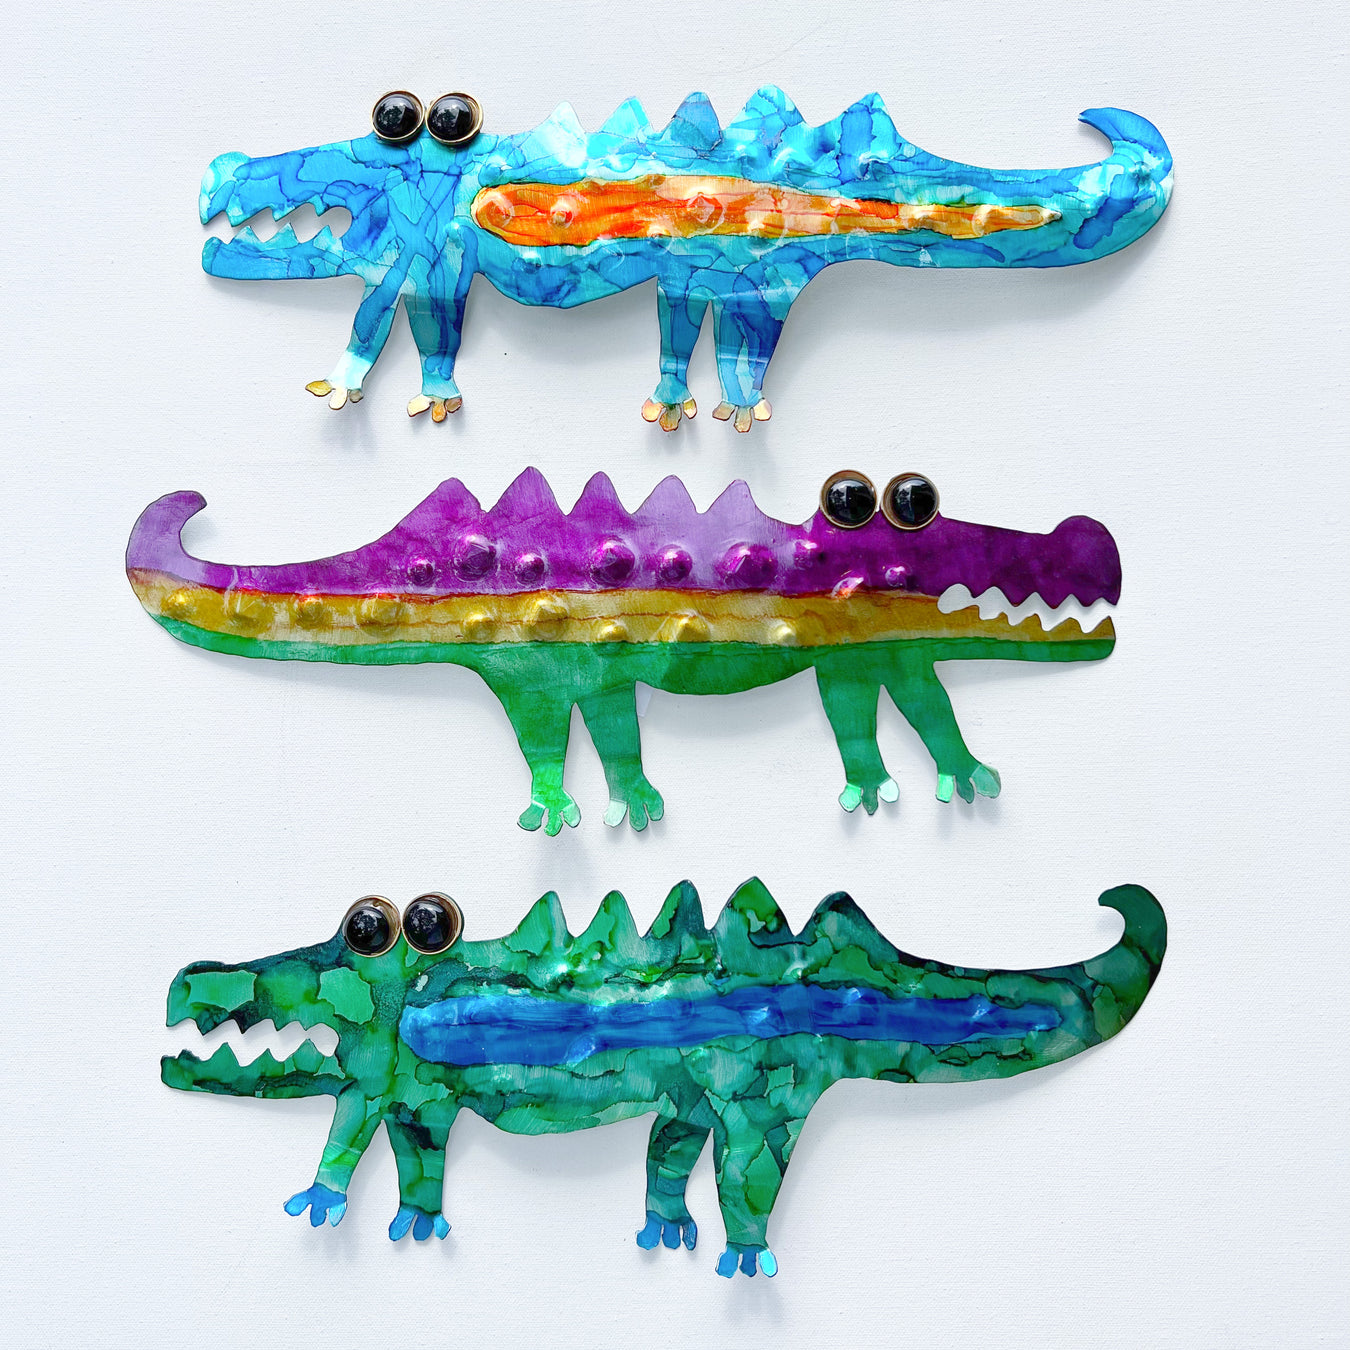 Handmade metal alligator art for affordable gifts in New Orleans